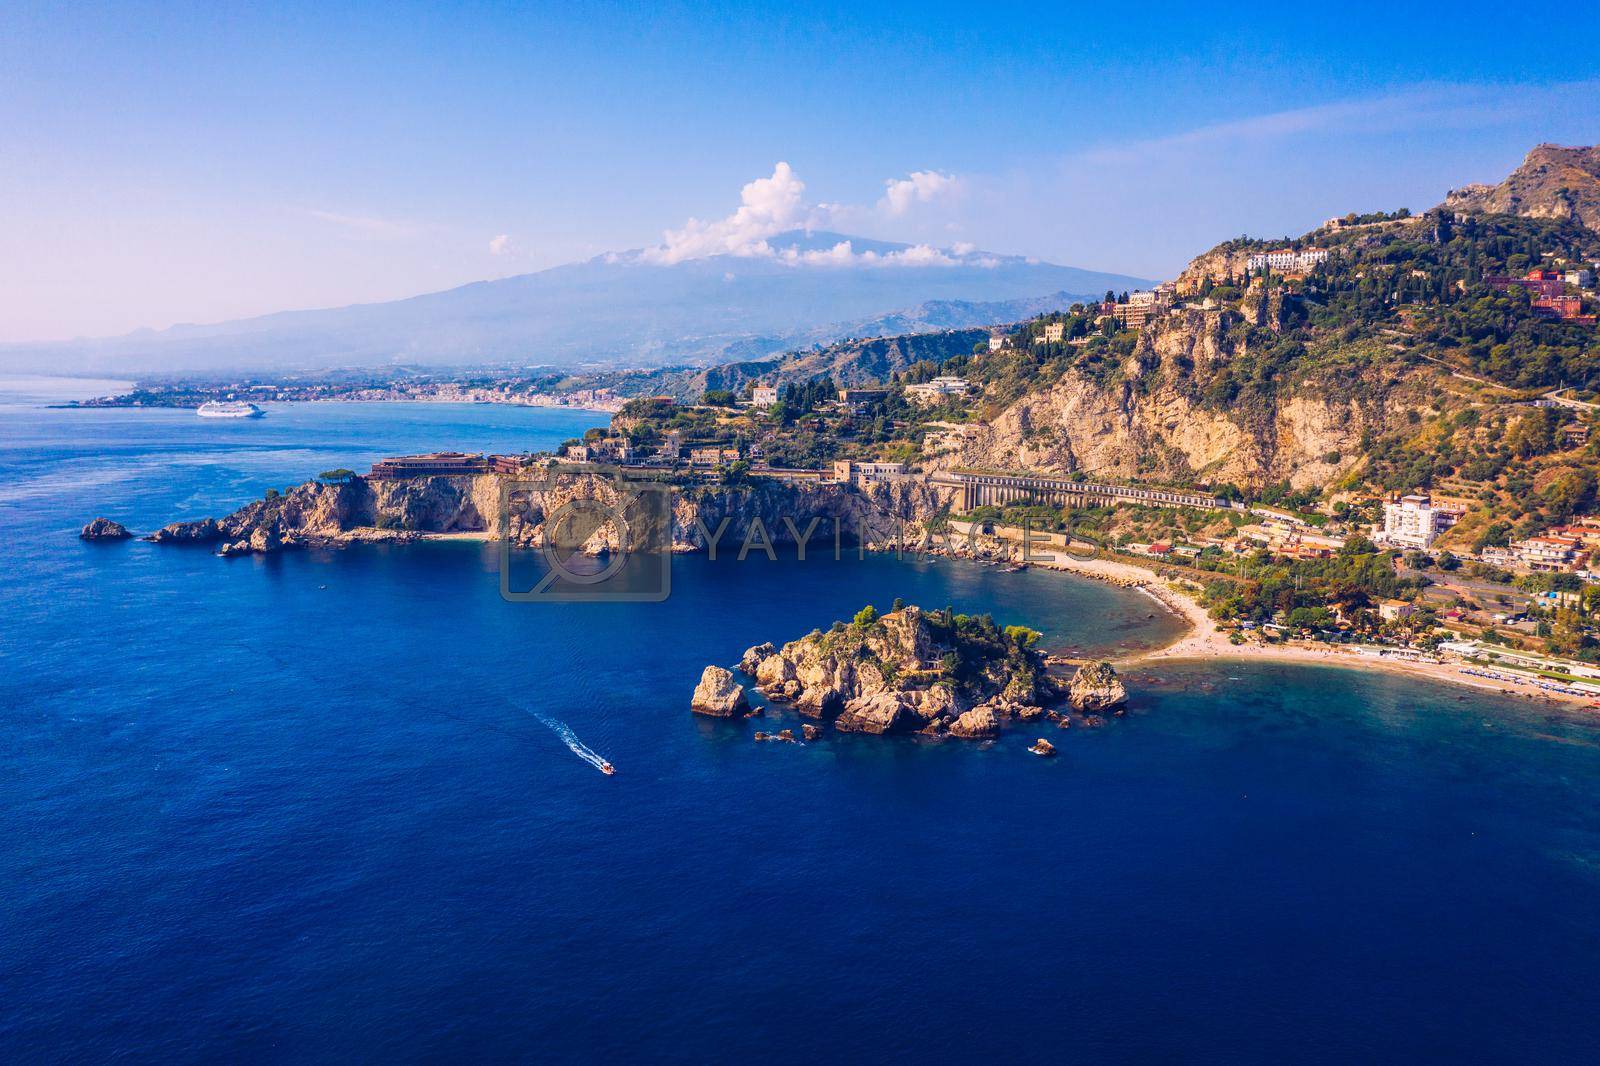 Royalty free image of Aerial view of Isola Bella in Taormina, Sicily, Italy. Isola Bella is small island near Taormina, Sicily, Italy. Narrow path connects island to mainland Taormina beach in azure waters of Ionian Sea.  by DaLiu